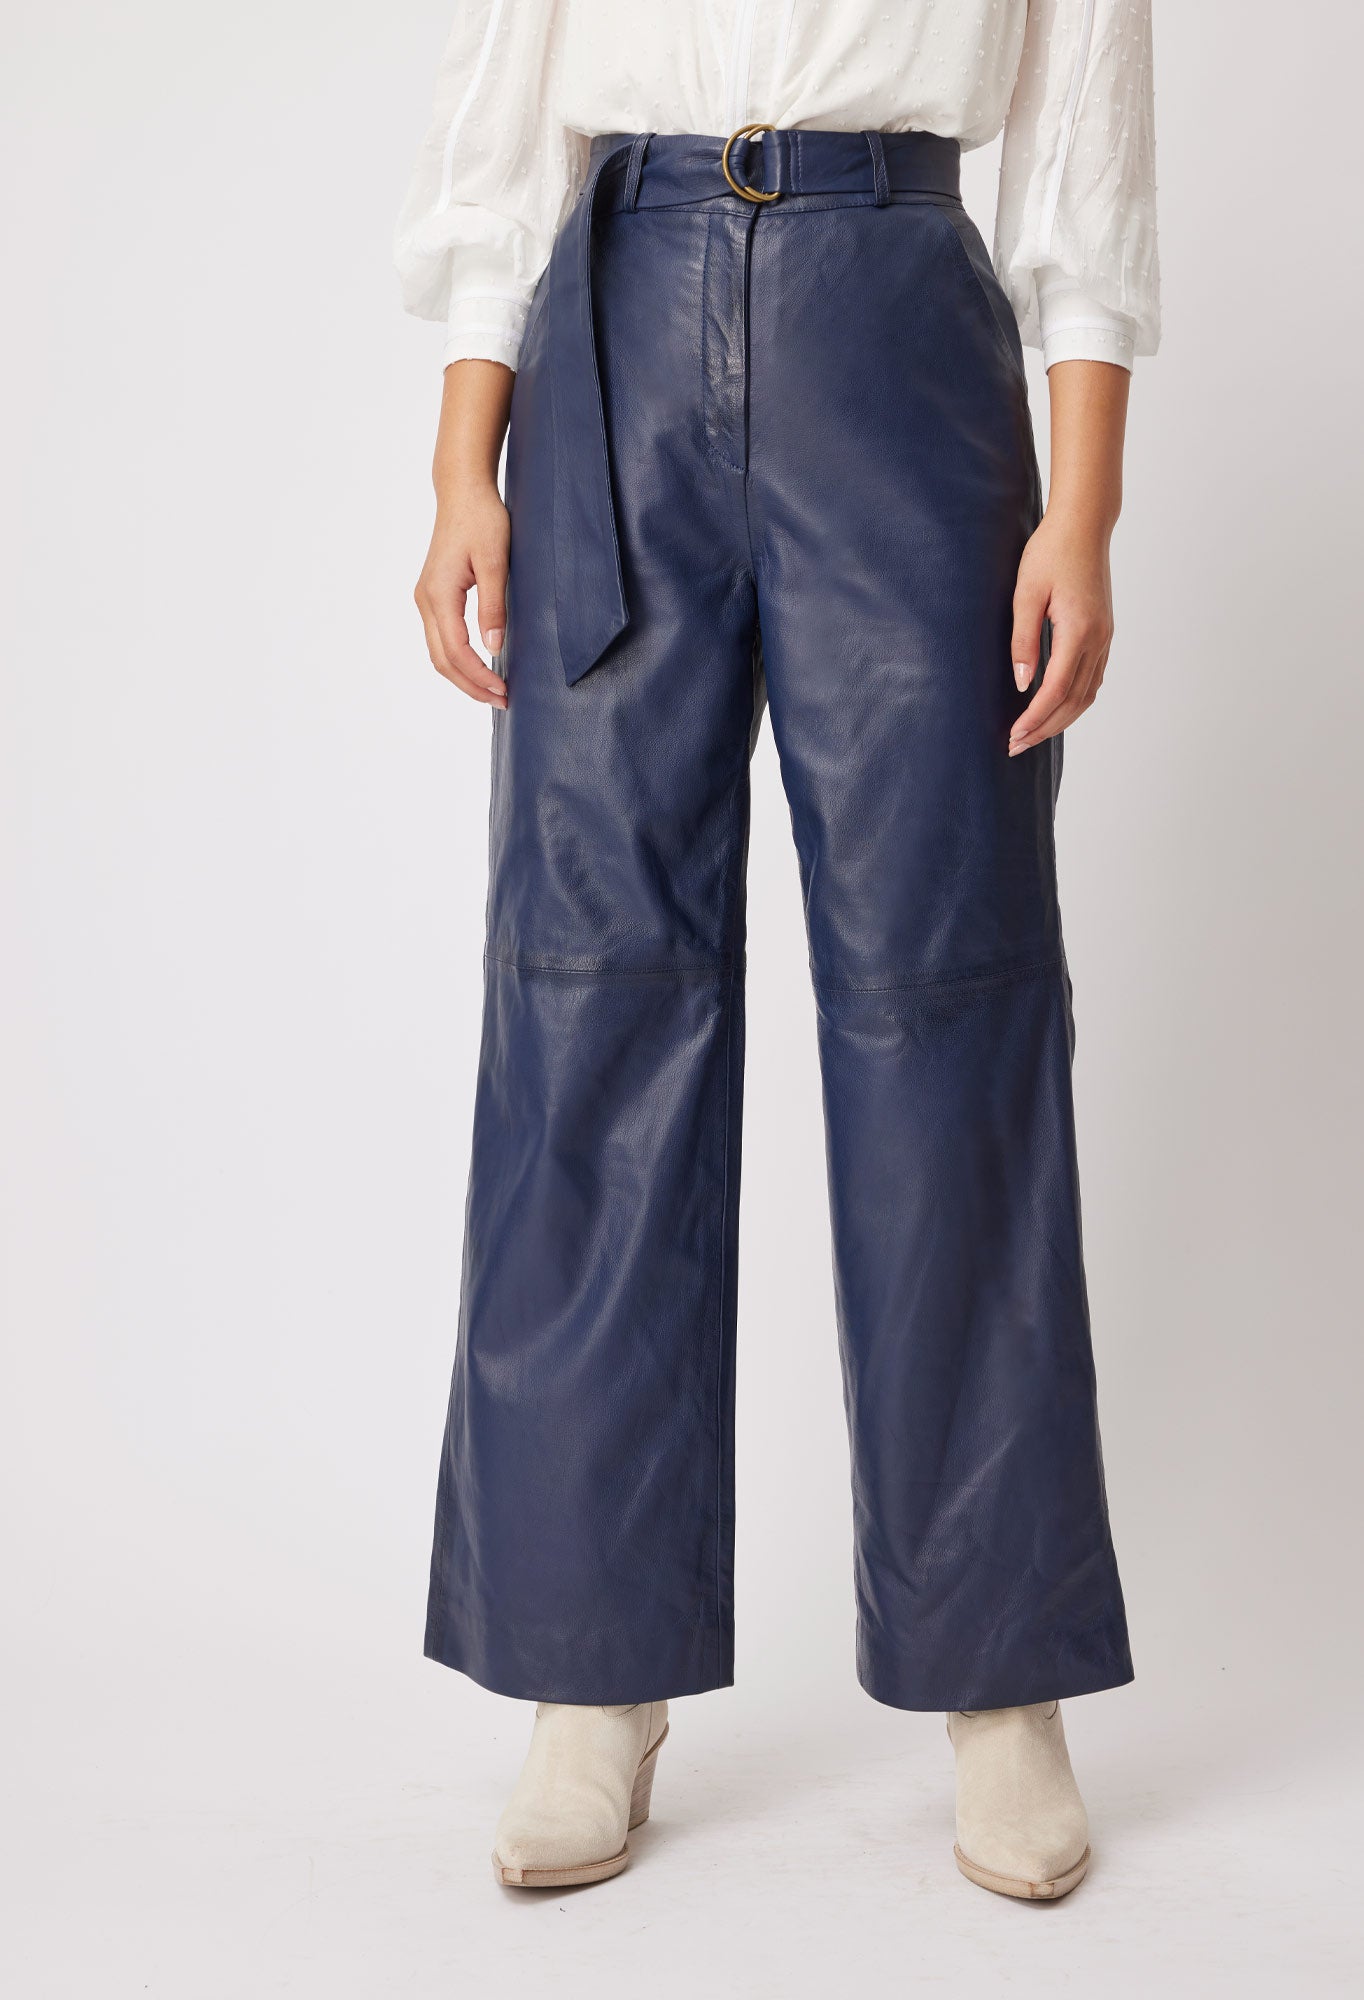 OnceWas Halston Leather Pant in Navy